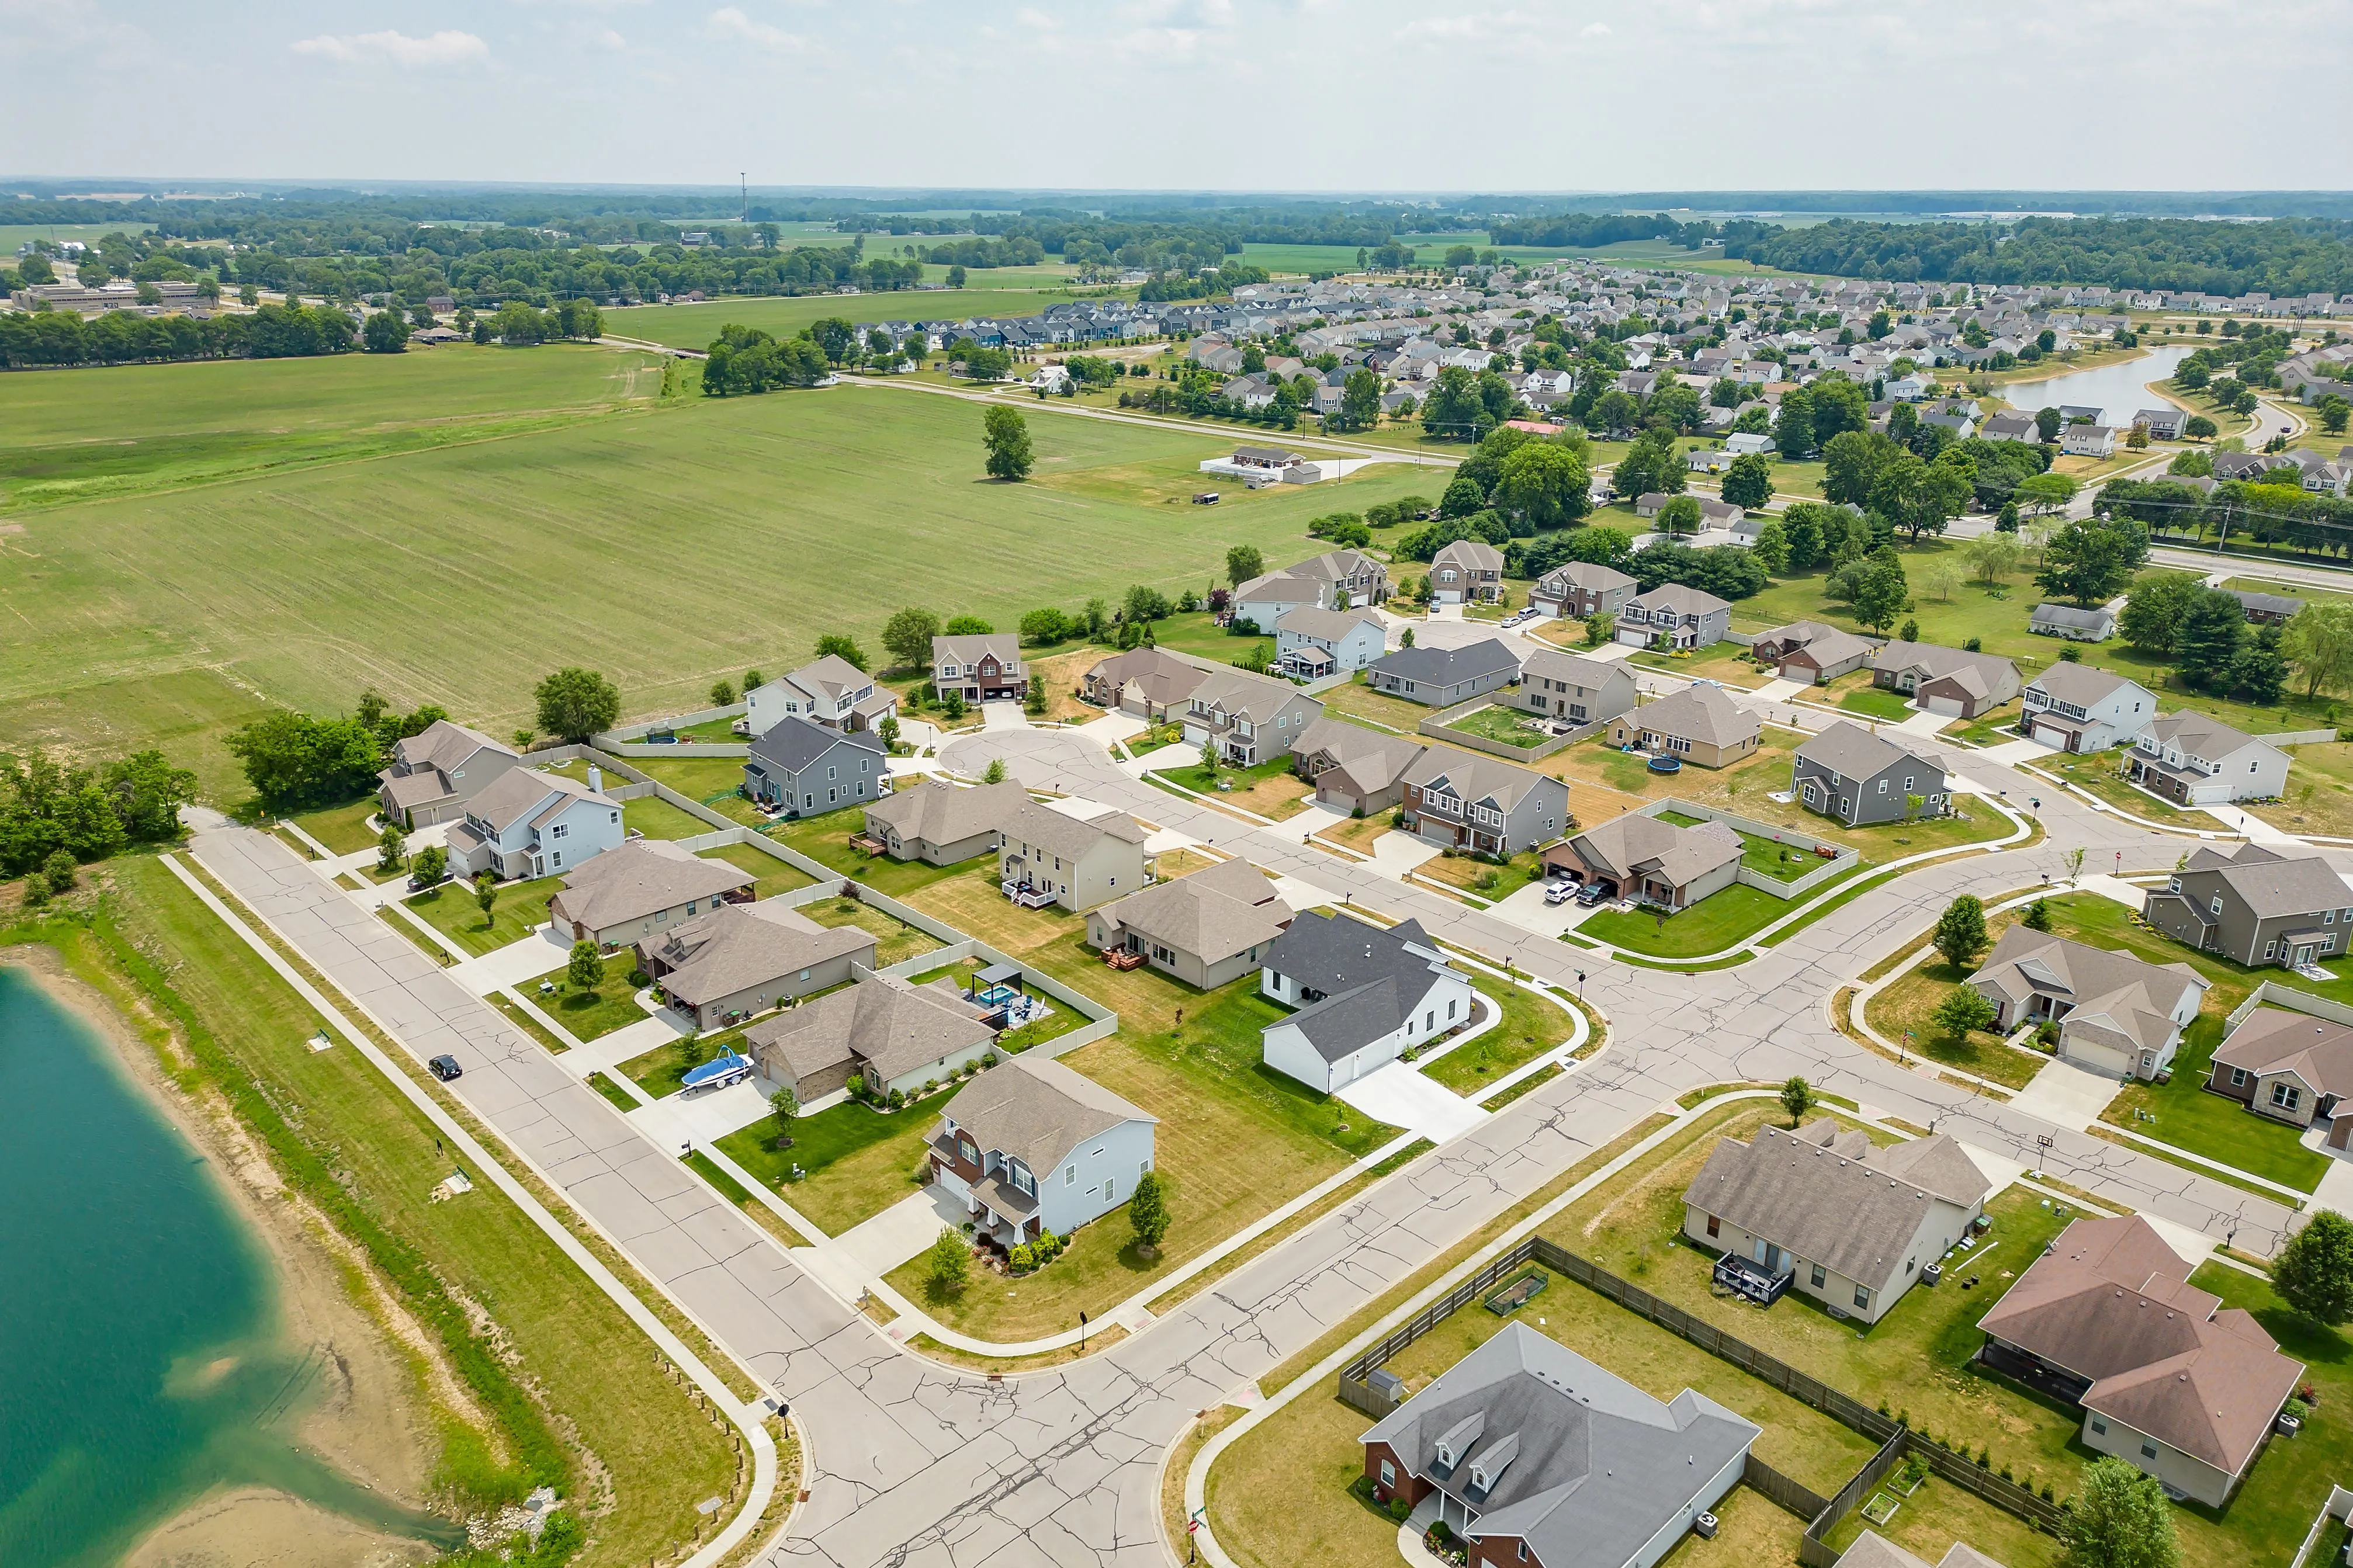 Aerial view of a suburban neighborhood next to a body of water with green open fields in the background.